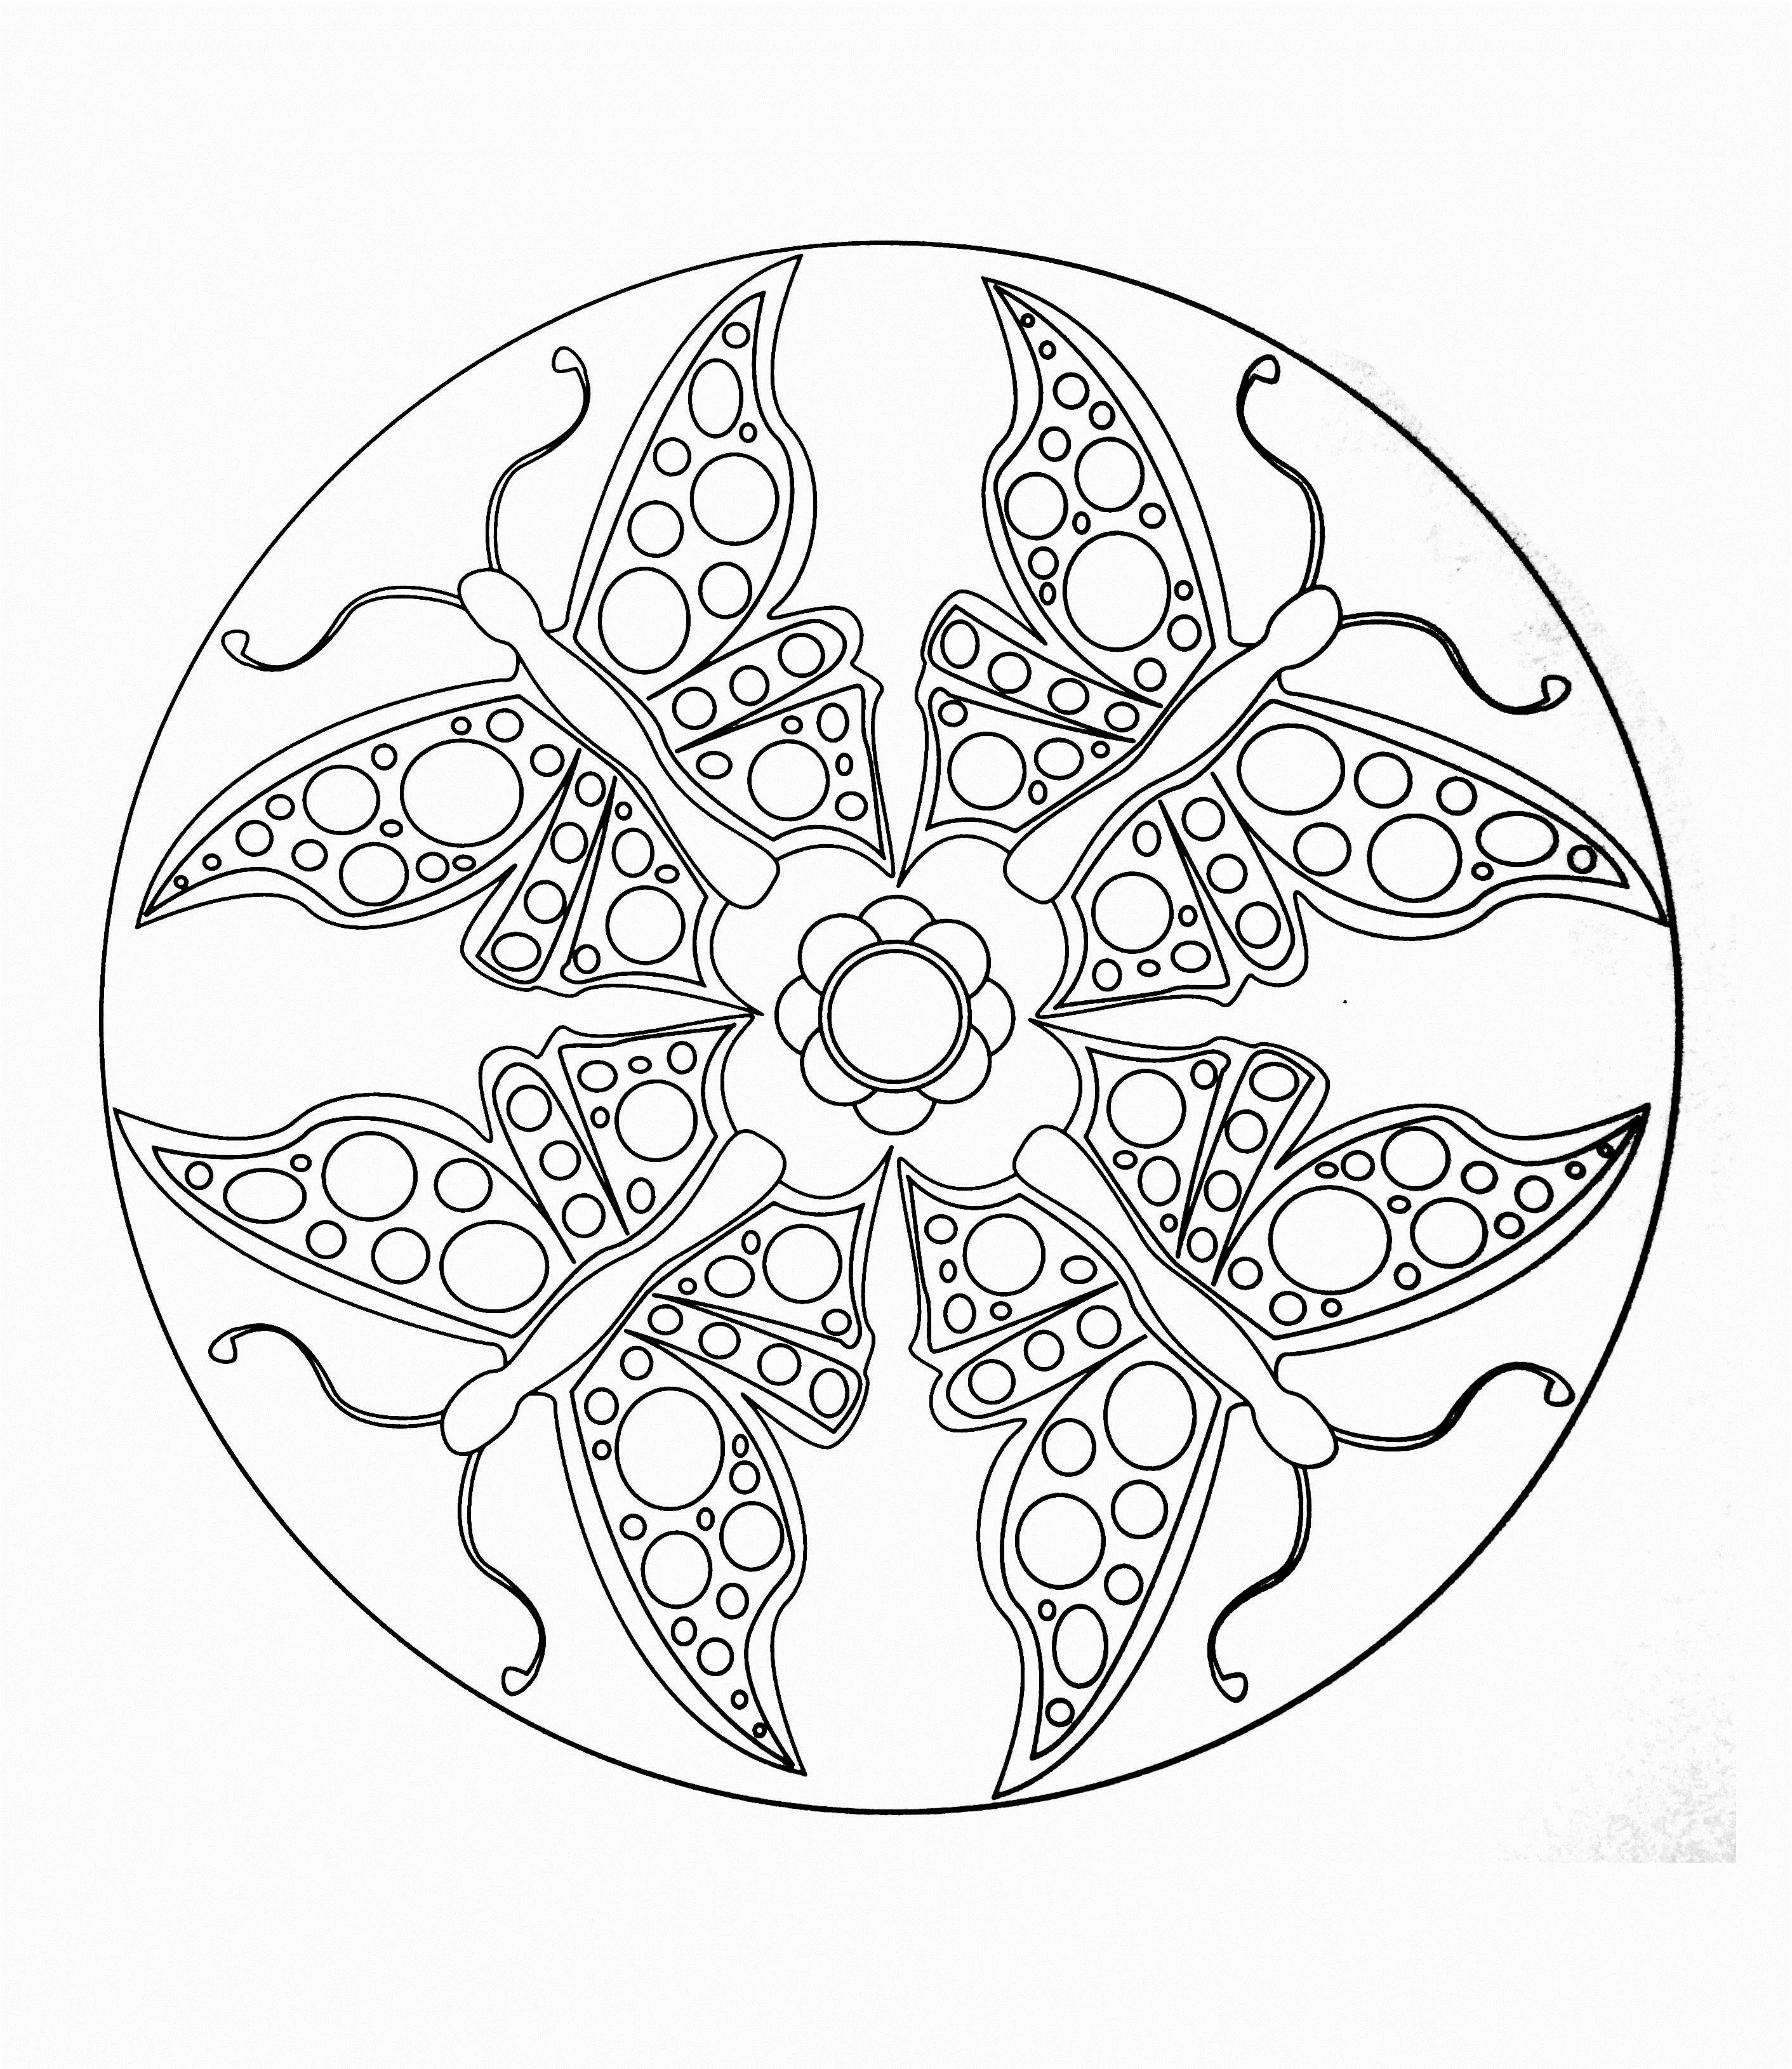 Mandala coloring page with butterflies. A beautiful Mandala coloring page, of great quality and originality.